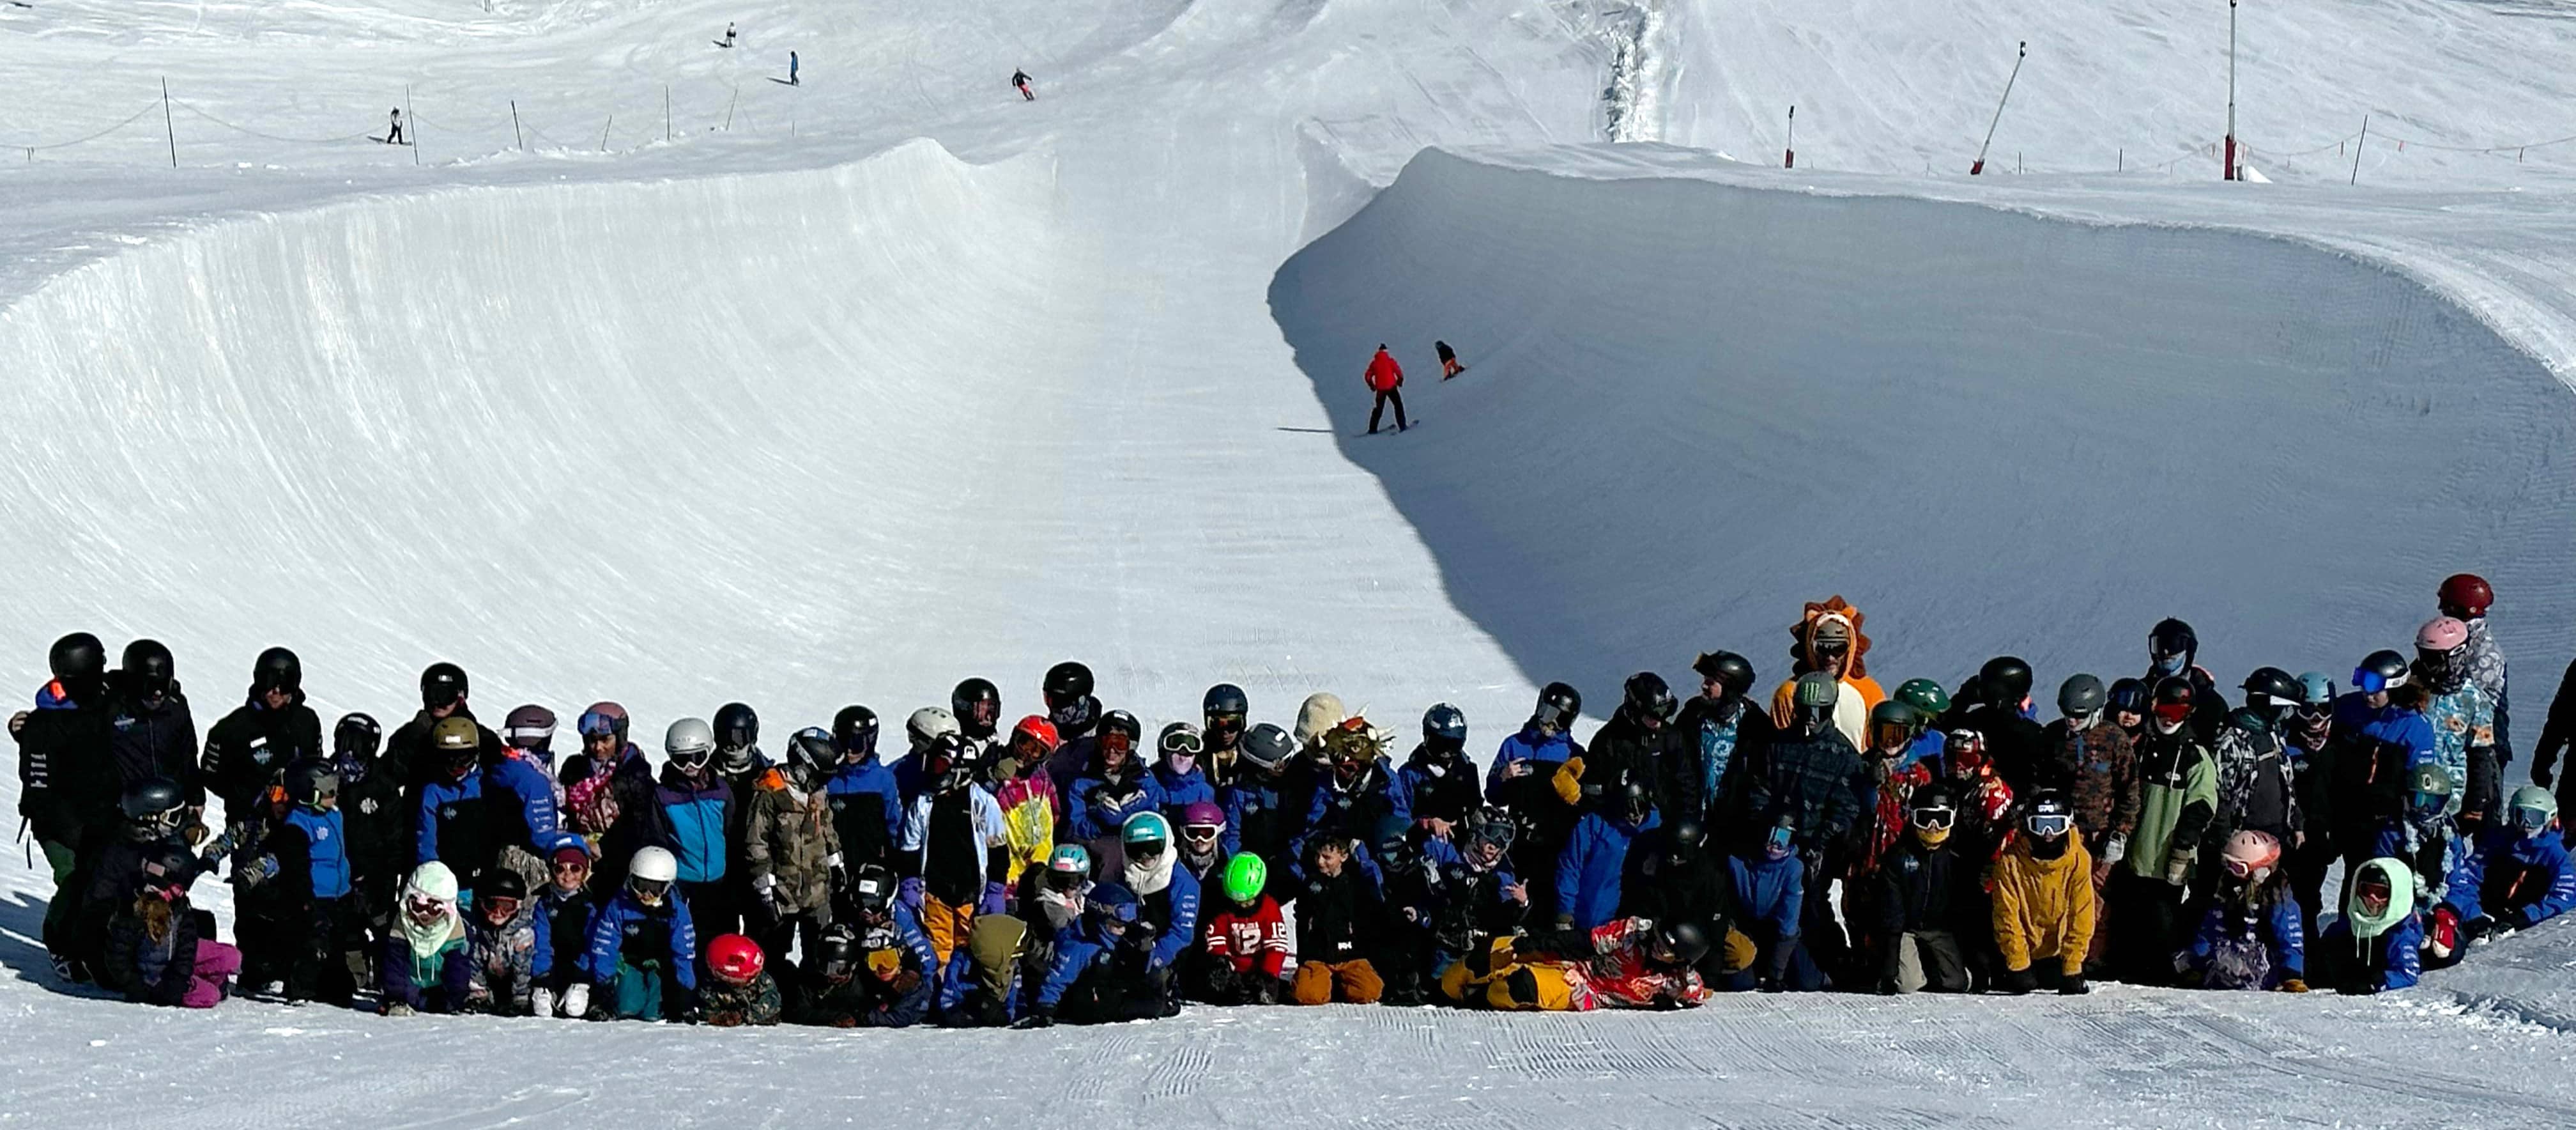 30 SSWSC athletes are competing at Copper for USASA Nationals